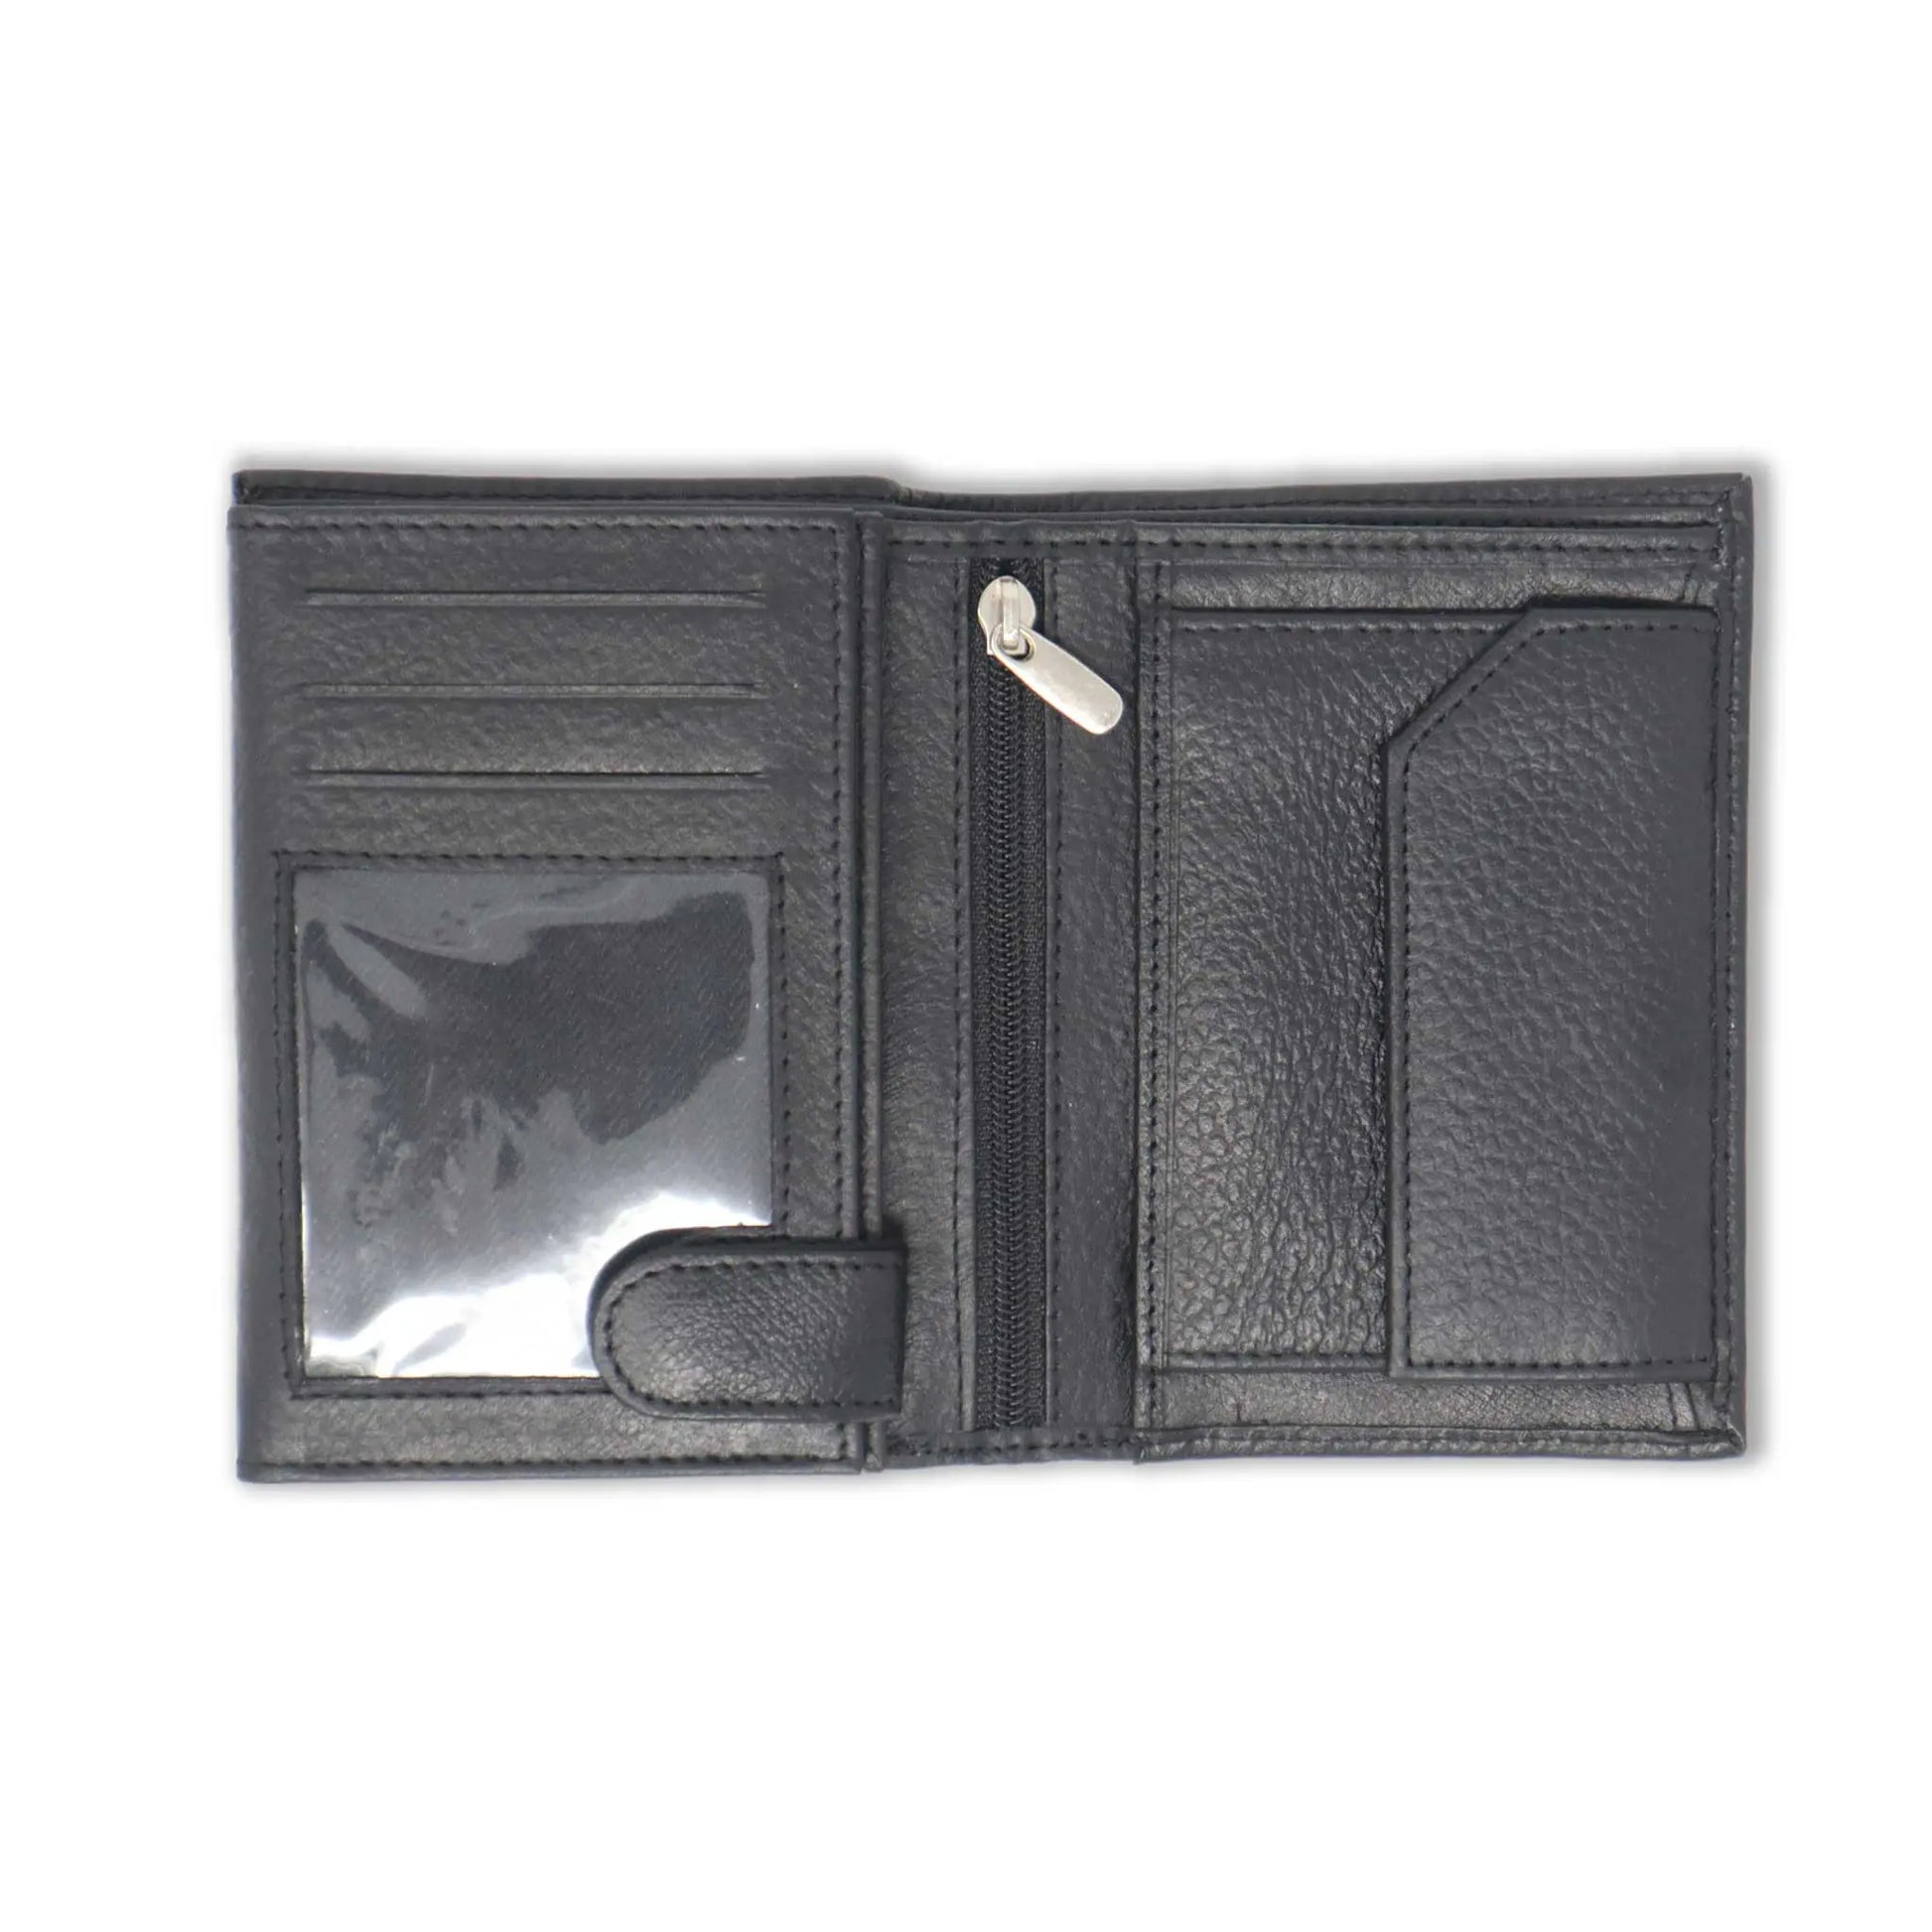 Tall Black Leather Wallet - Larimars Clothing Men's Formal and casual wear shirts